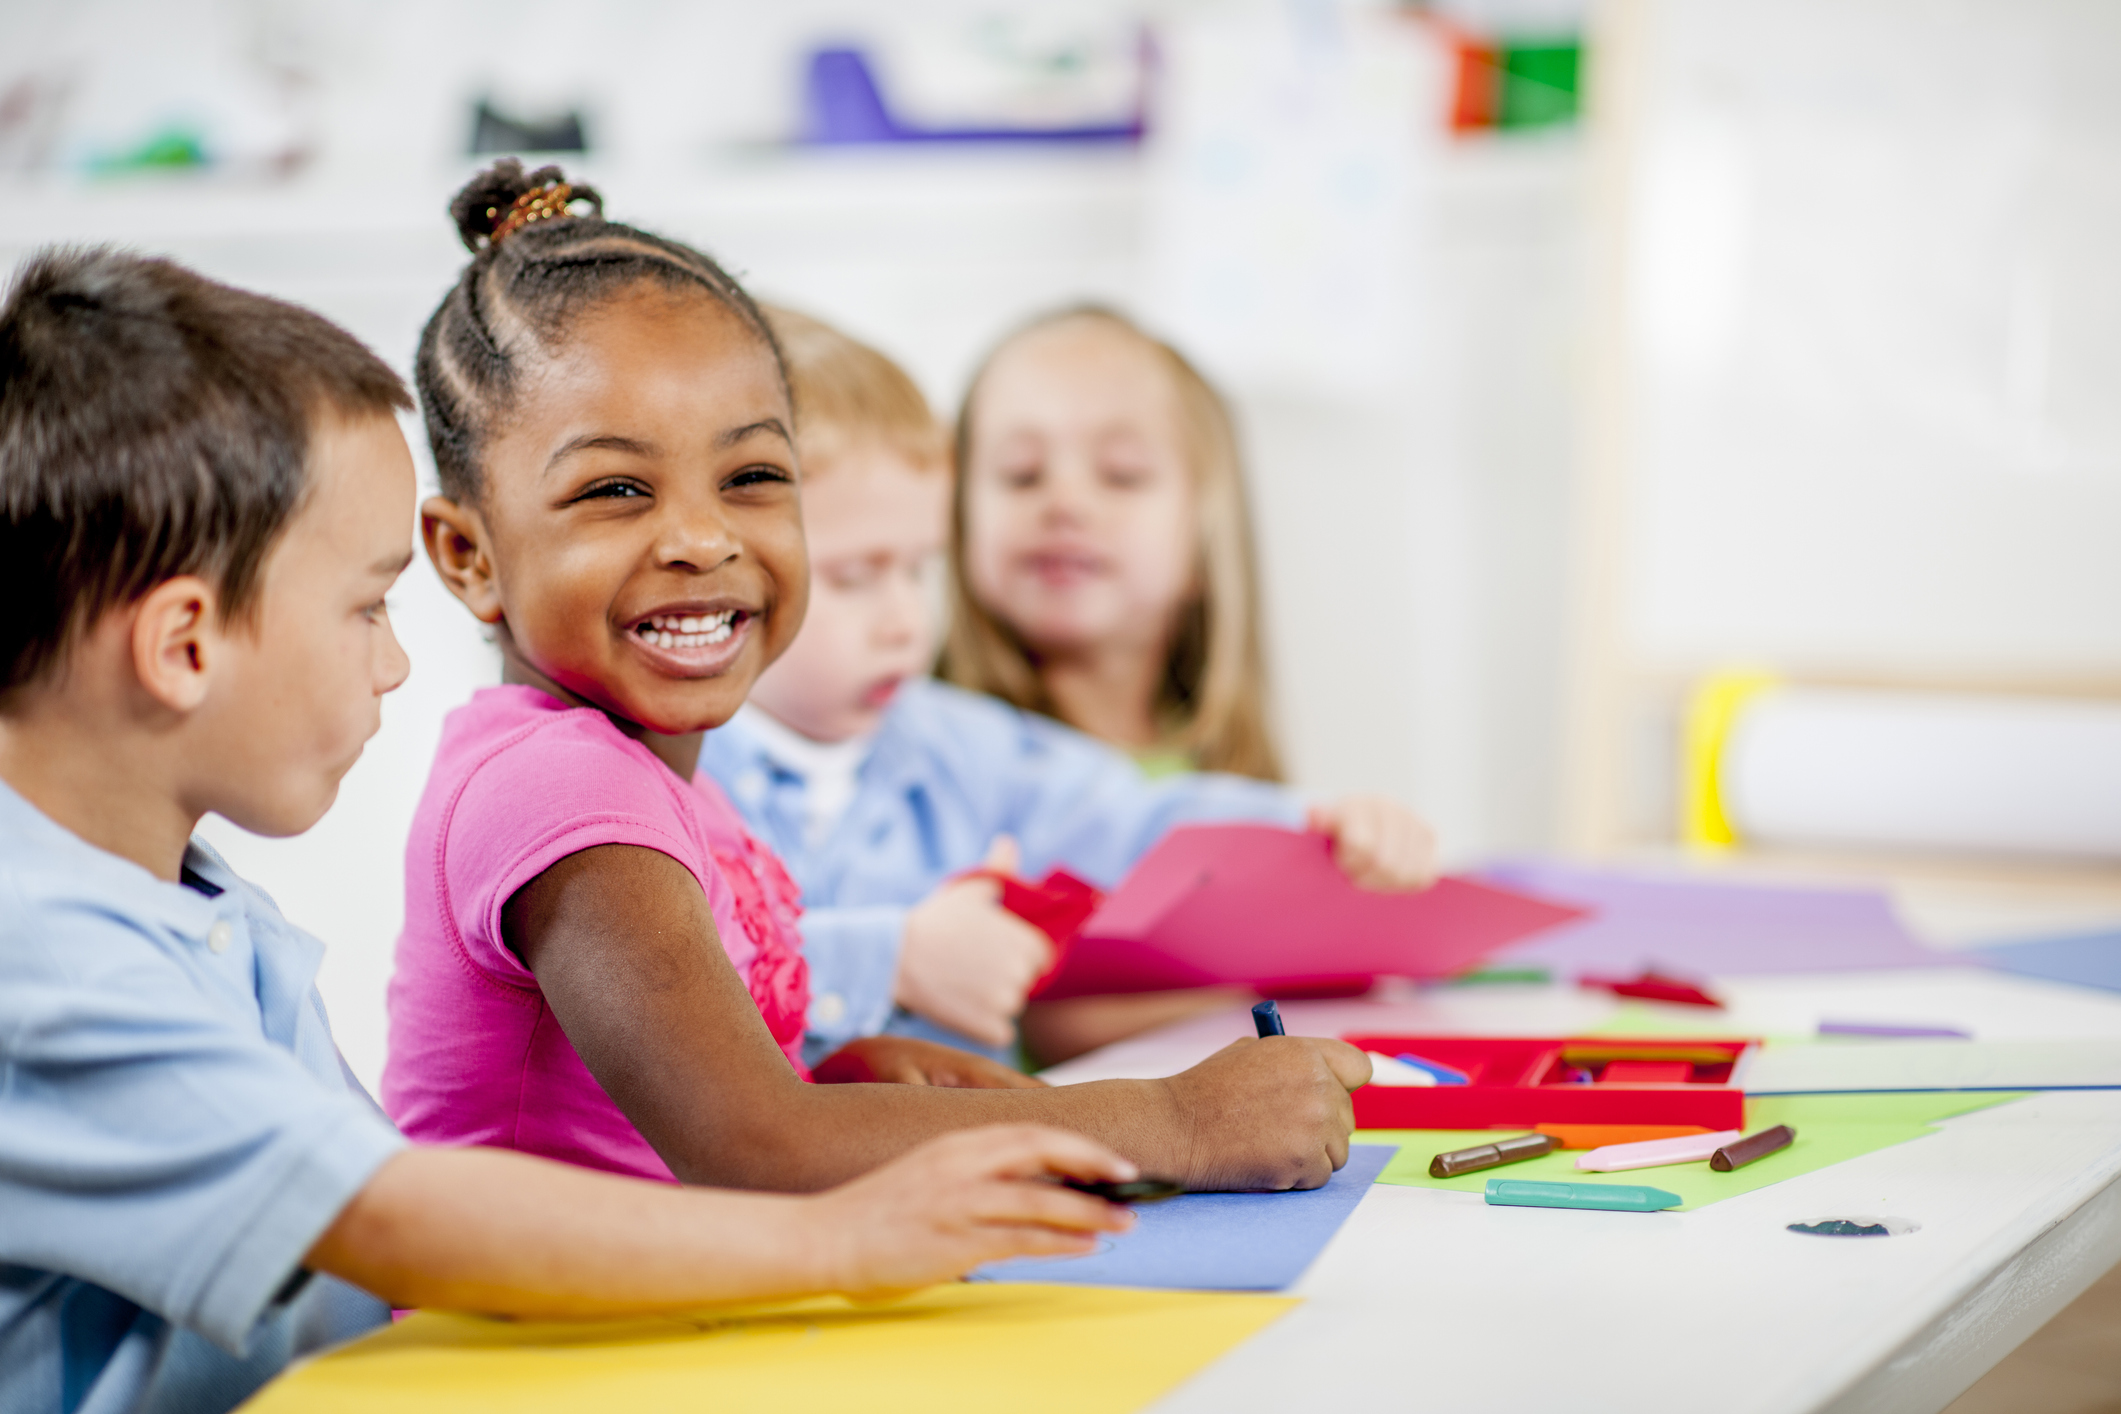 A portrait of a child smiling in a classroom setting